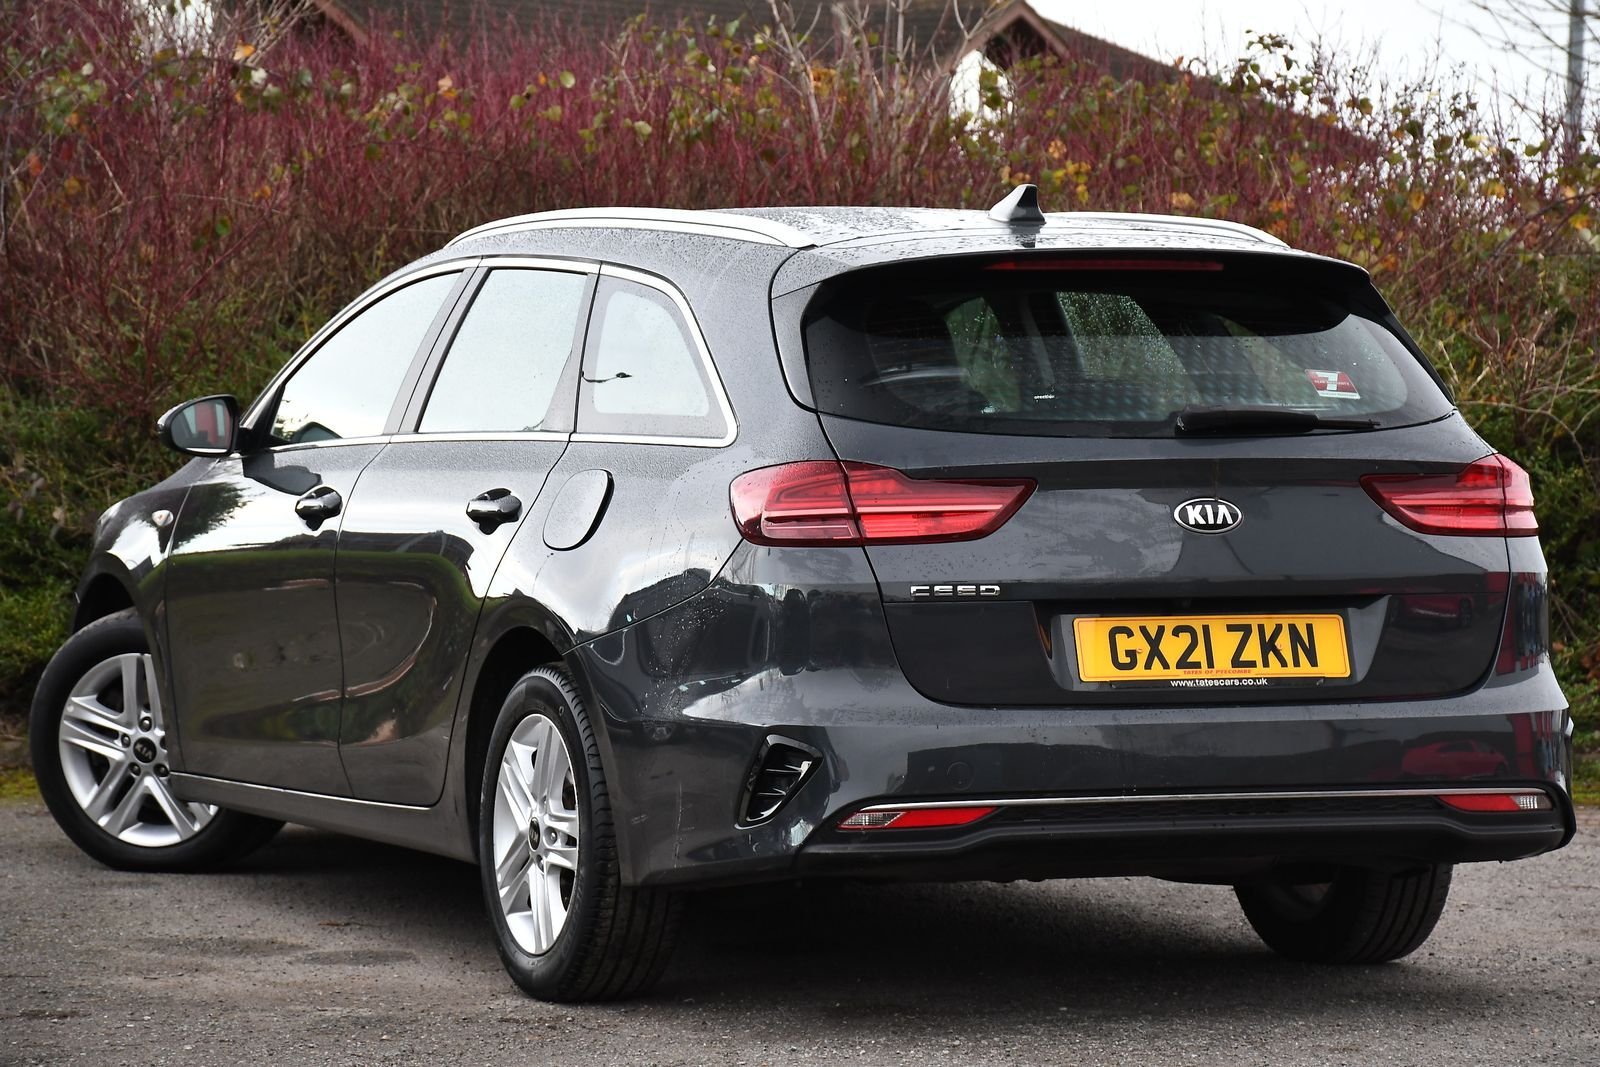 New products for KIA Ceed Sportwagon - H & R